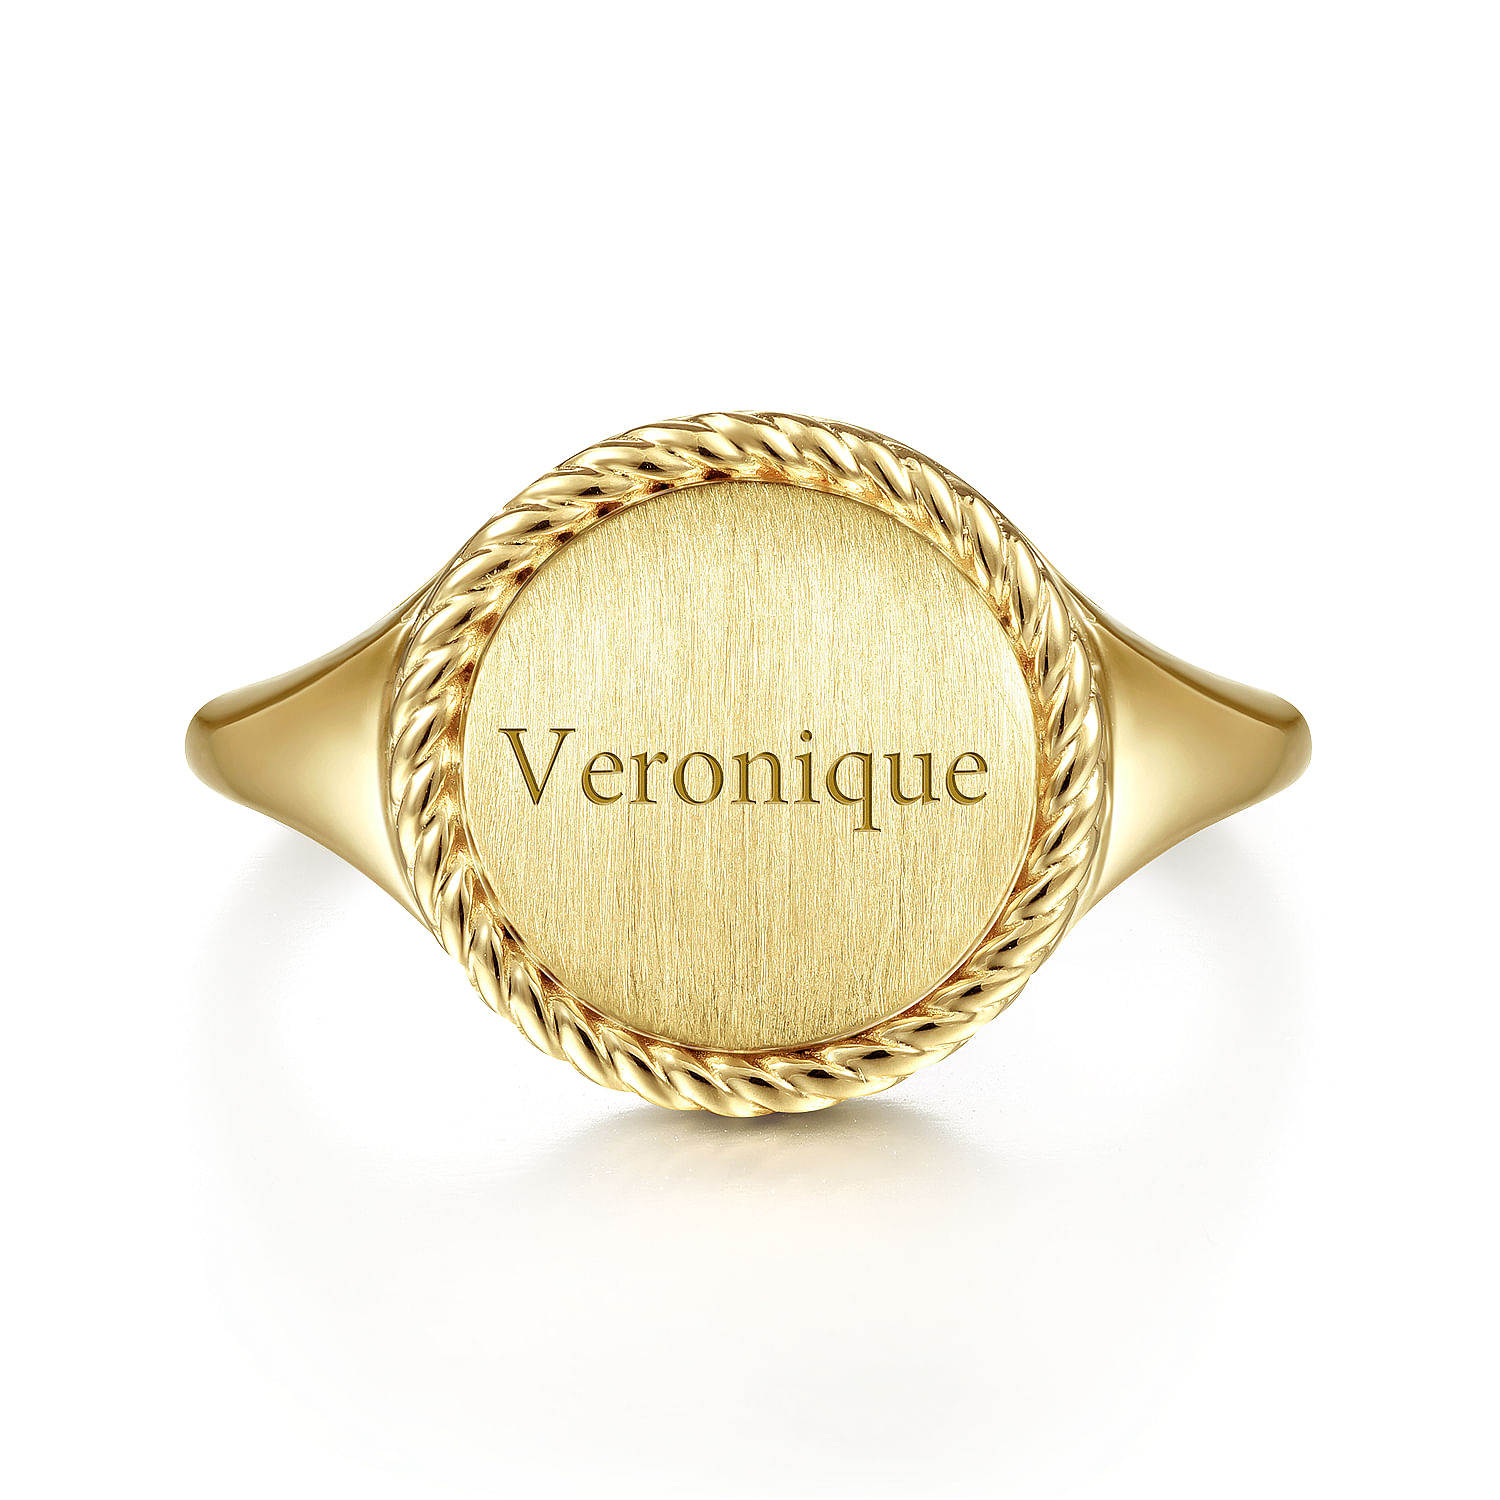 14K Yellow Gold Round  Engravable Signet Ring with Twisted Rope Frame